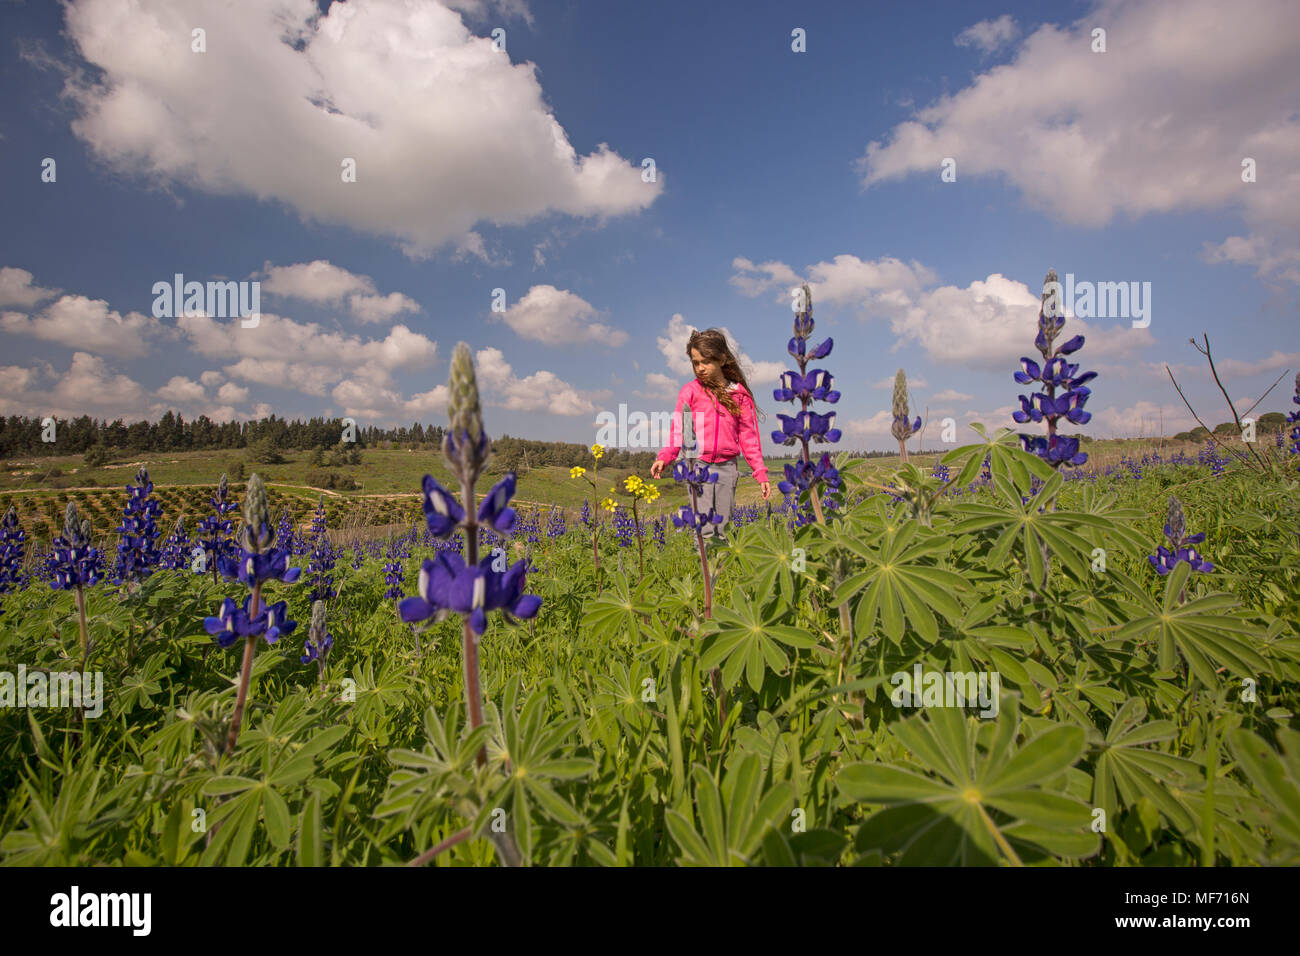 A girl walks in a field of Blue lupin (Lupinus pilosus) Photographed in Ramot Menashe, Israel in February Stock Photo